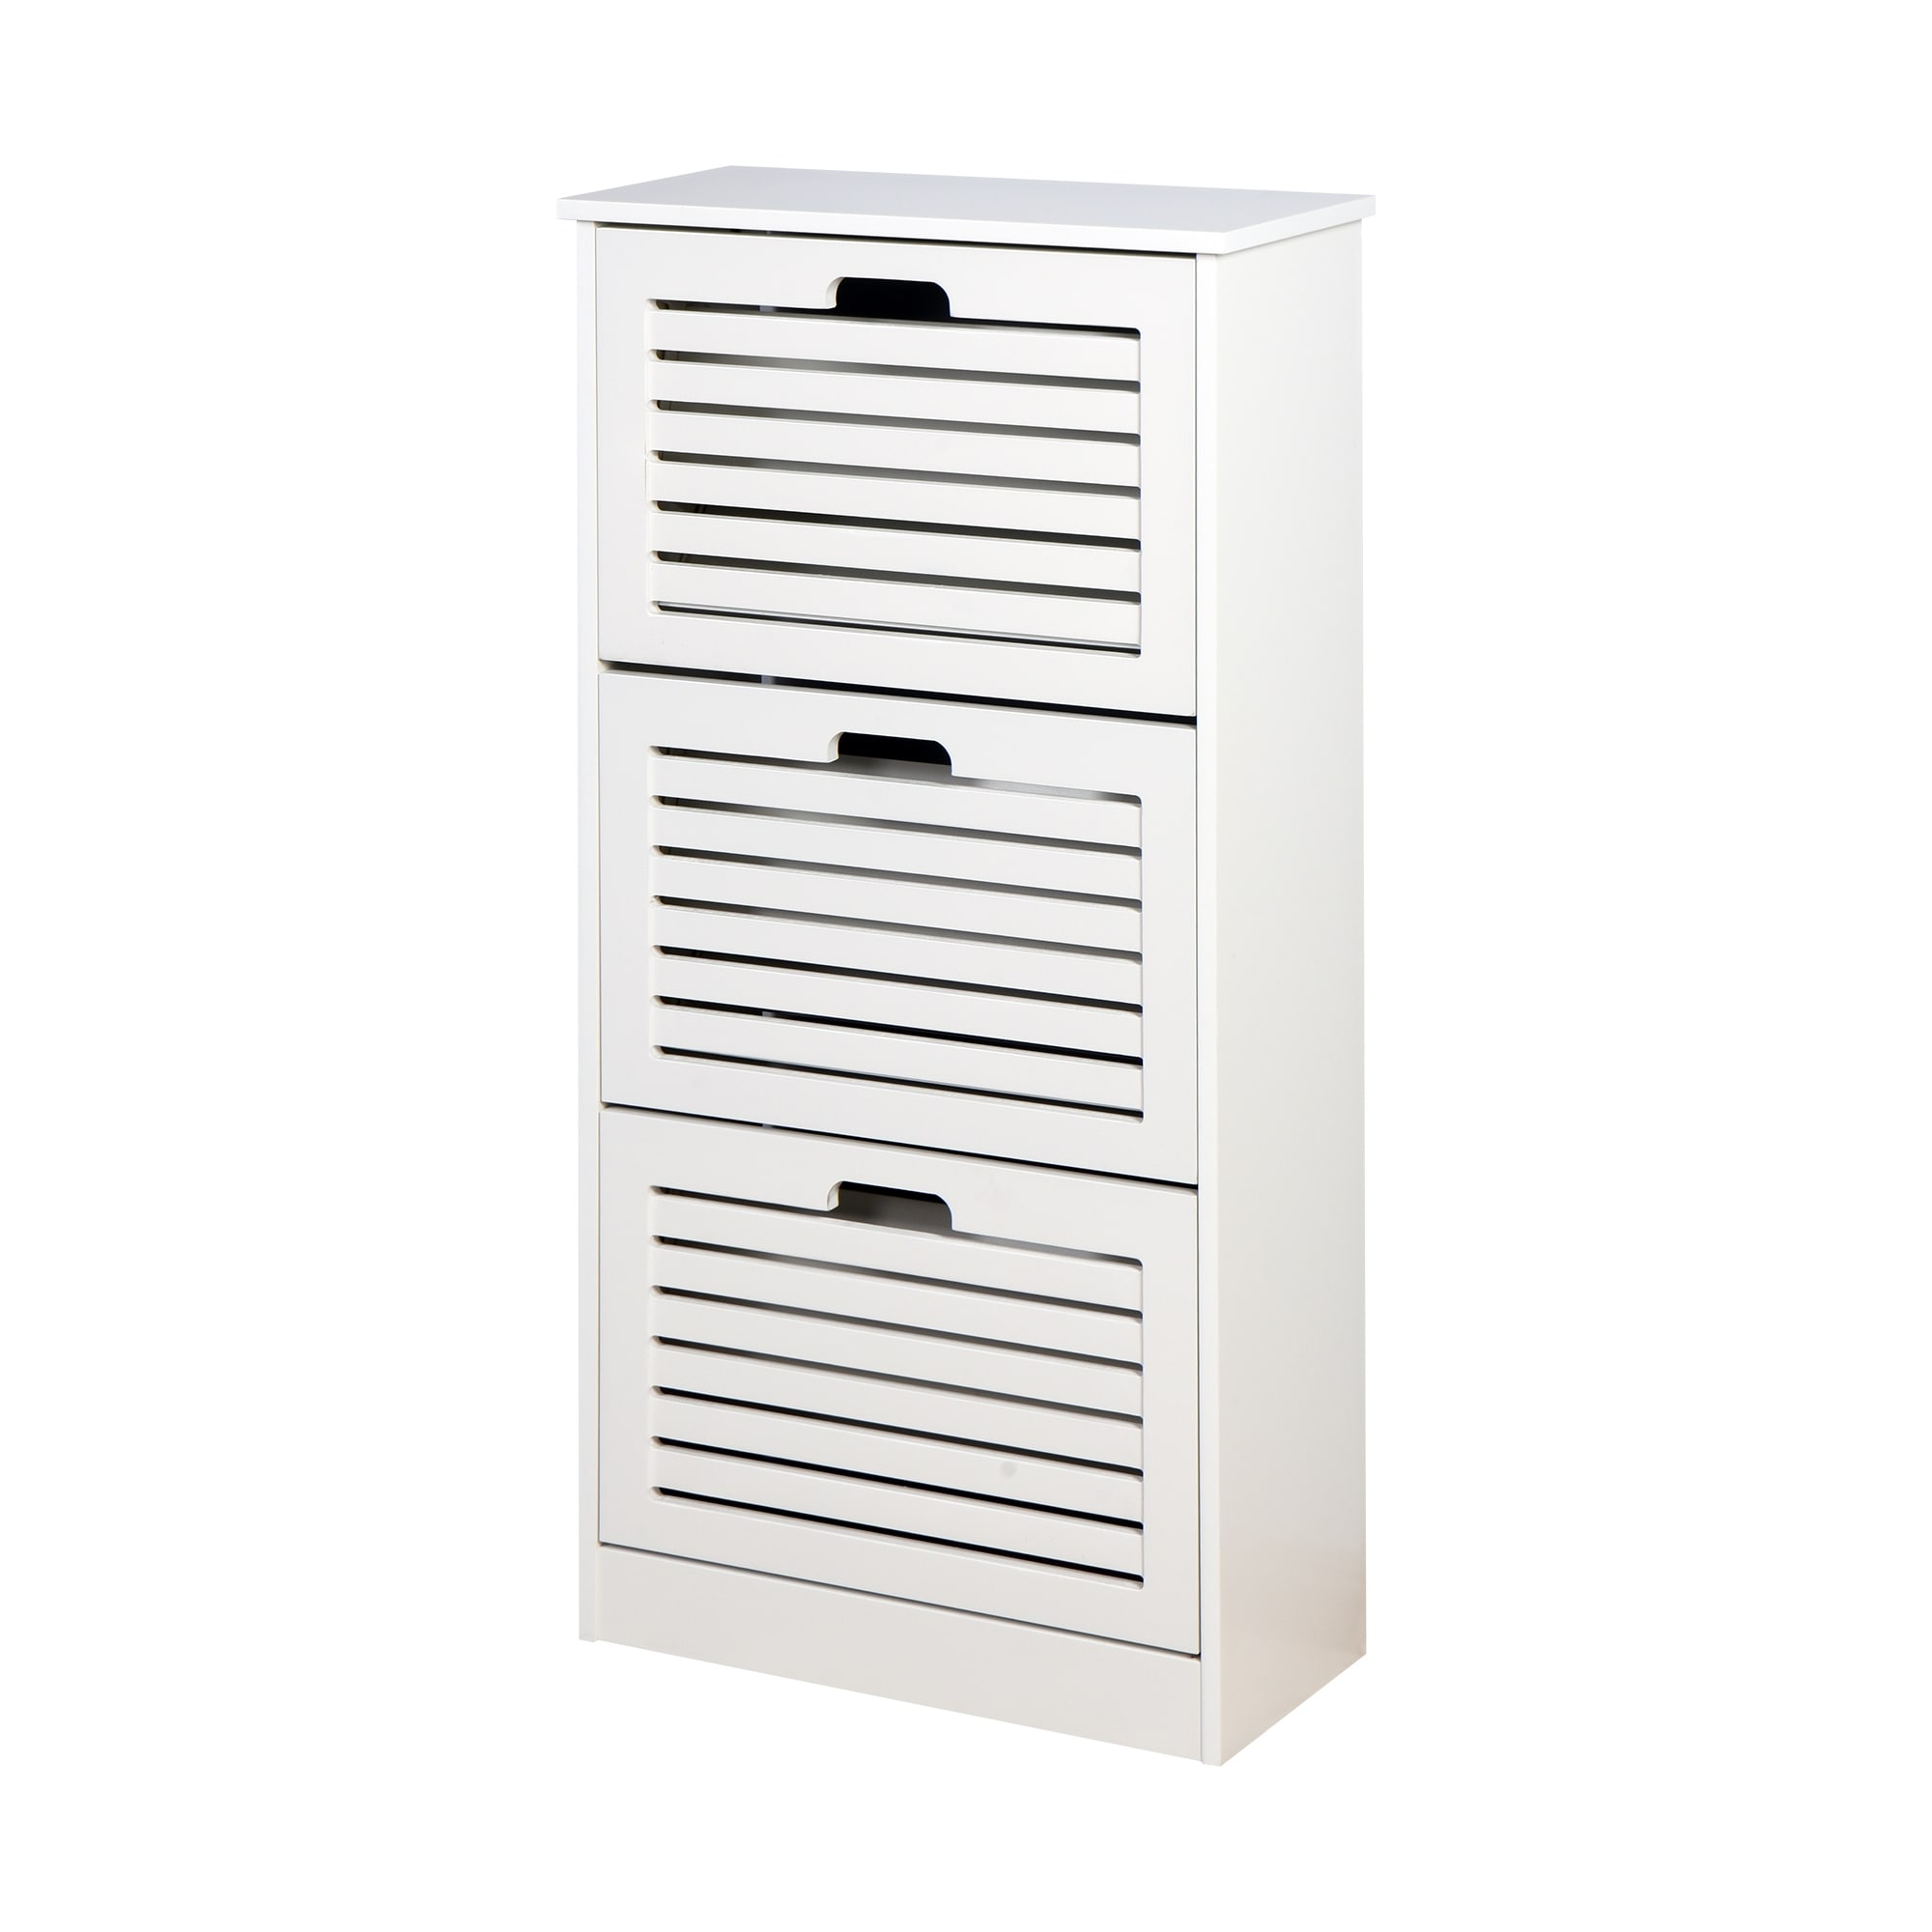 https://ak1.ostkcdn.com/images/products/is/images/direct/dbe07c30ad982e91bf0928d403e1499cca8b4cf3/Wooden-Shoe-Cabinet-for-Entryway%2C-White-Shoe-Storage-Cabinet-with-3-Flip-Doors-20.94x9.45x43.11-inch.jpg